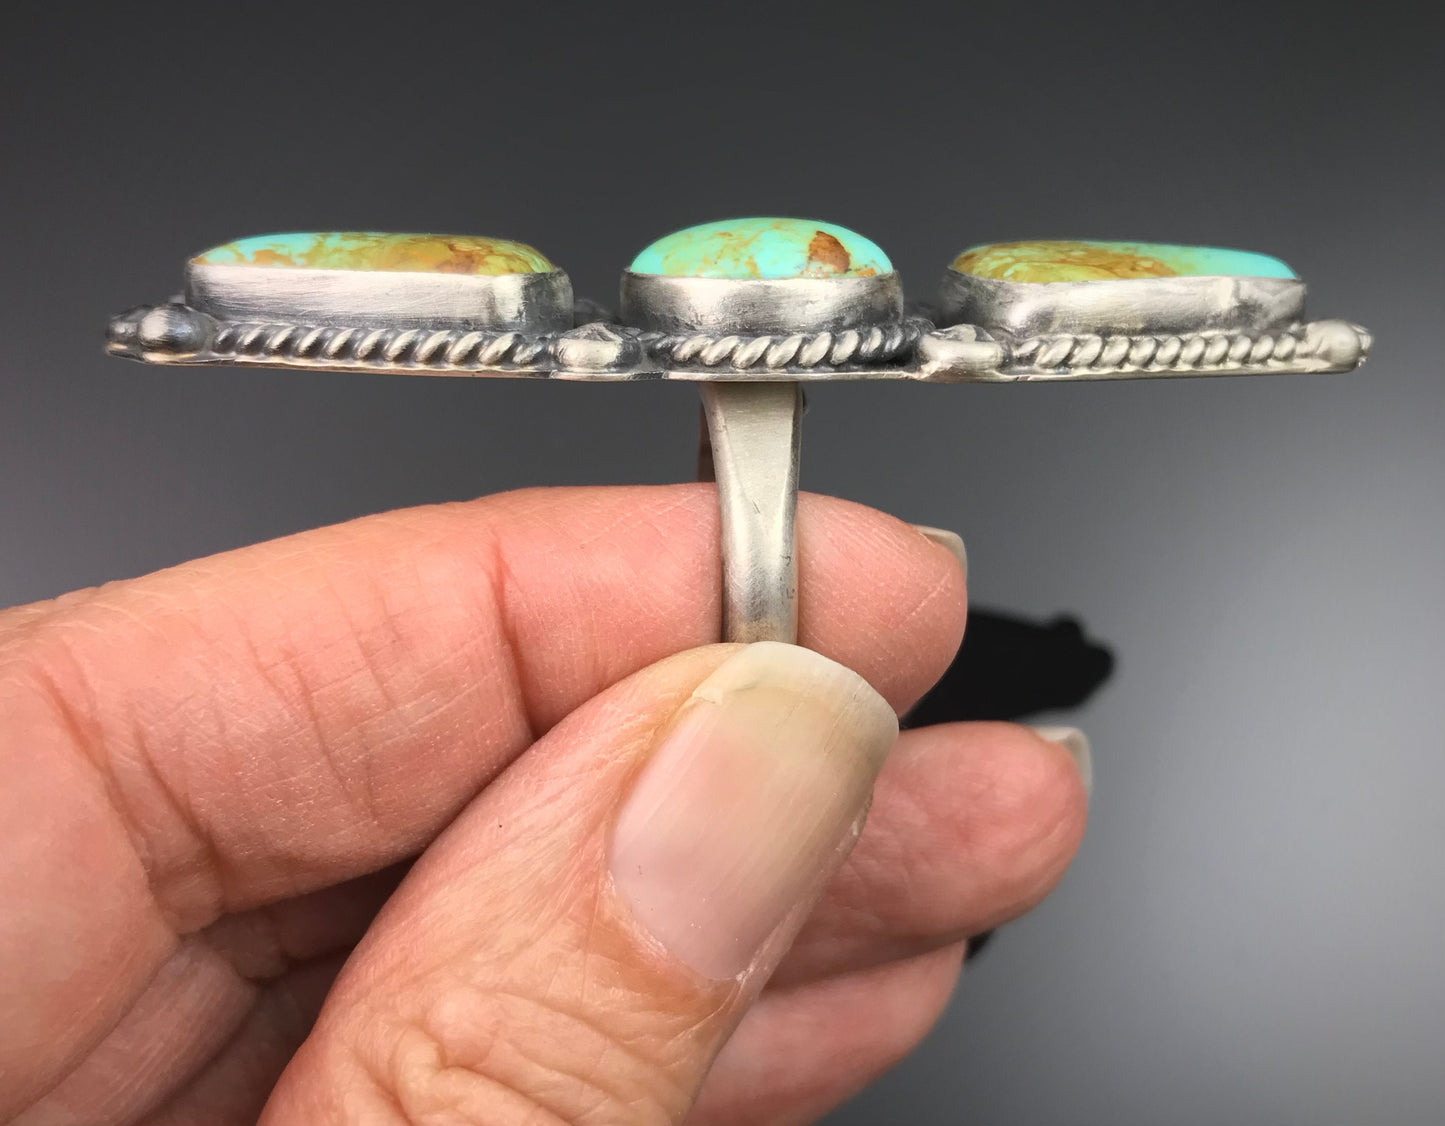 Turquoise Navajo Native American Ring Adjustable Signed: Augustine Largo